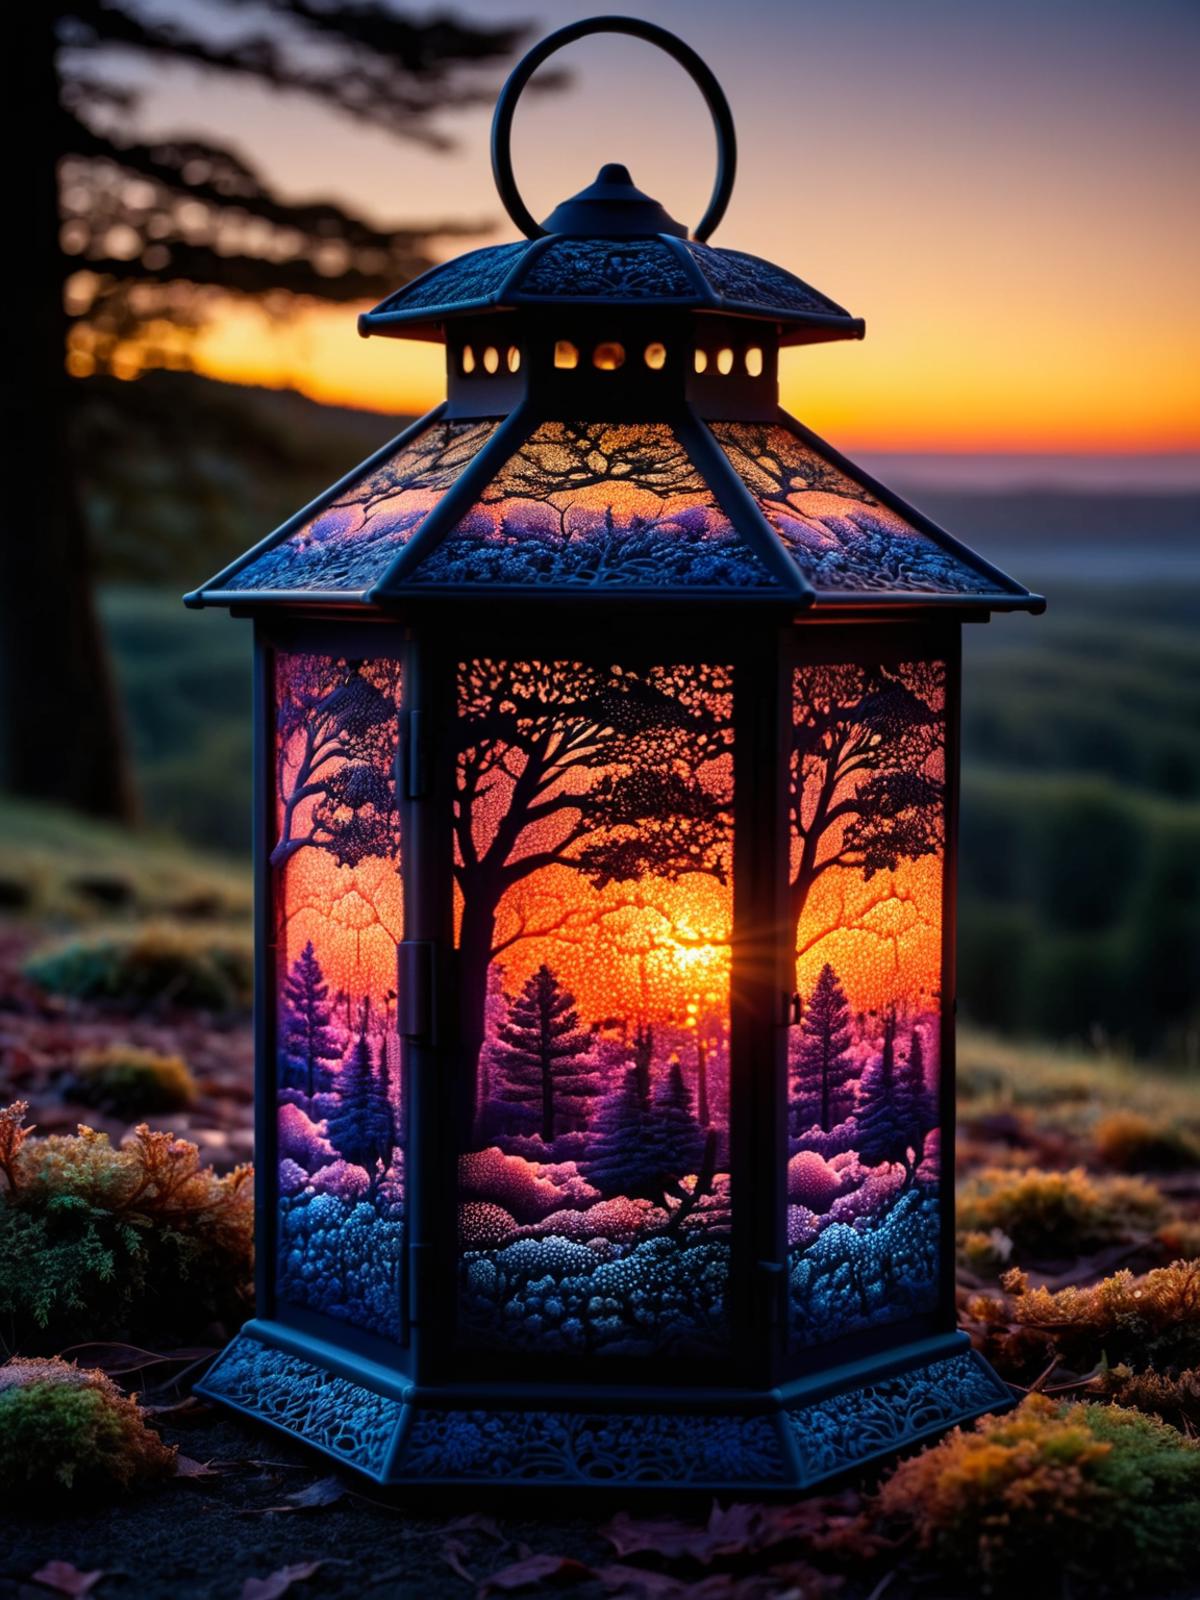 A Blue Glass Lamp with a Forest Scene at Sunset